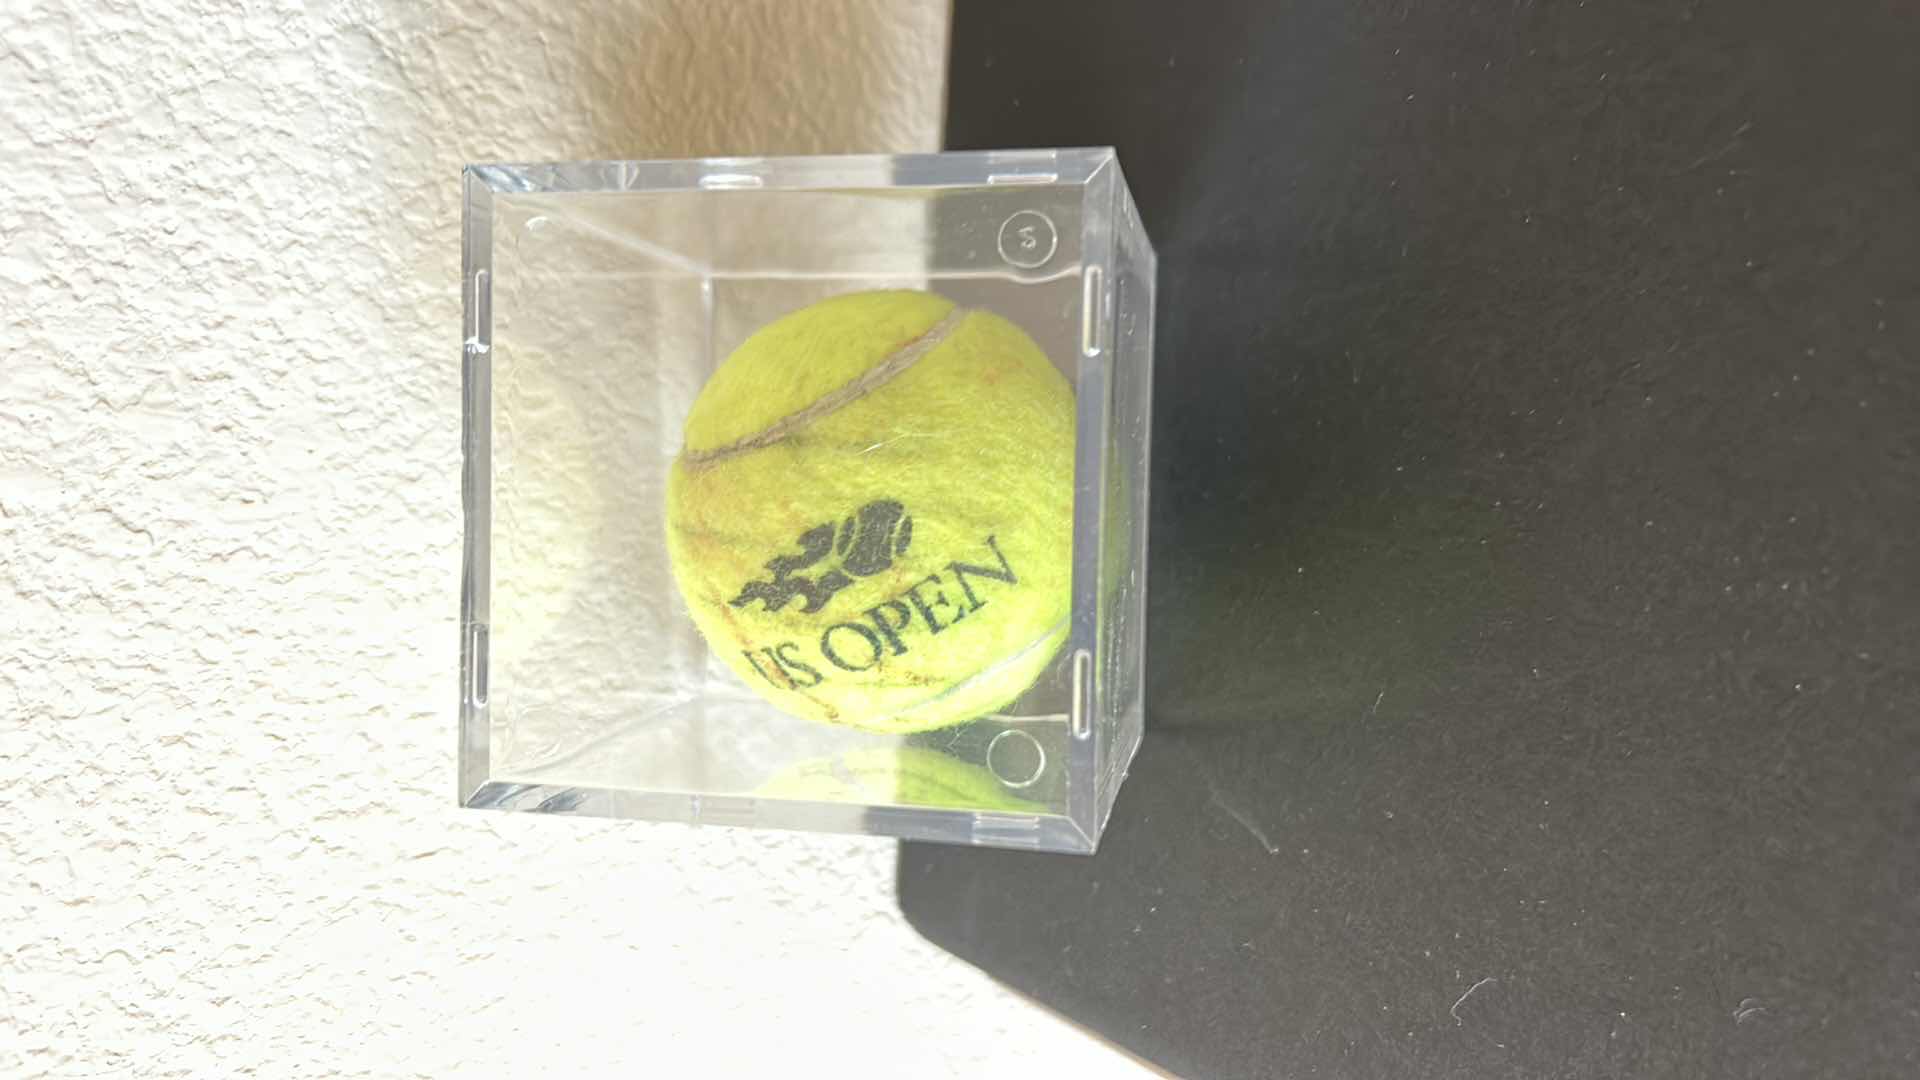 Photo 2 of 2 Tennis collectibles - tennis ball from the US open & Boyds Bear numbered tennis bear